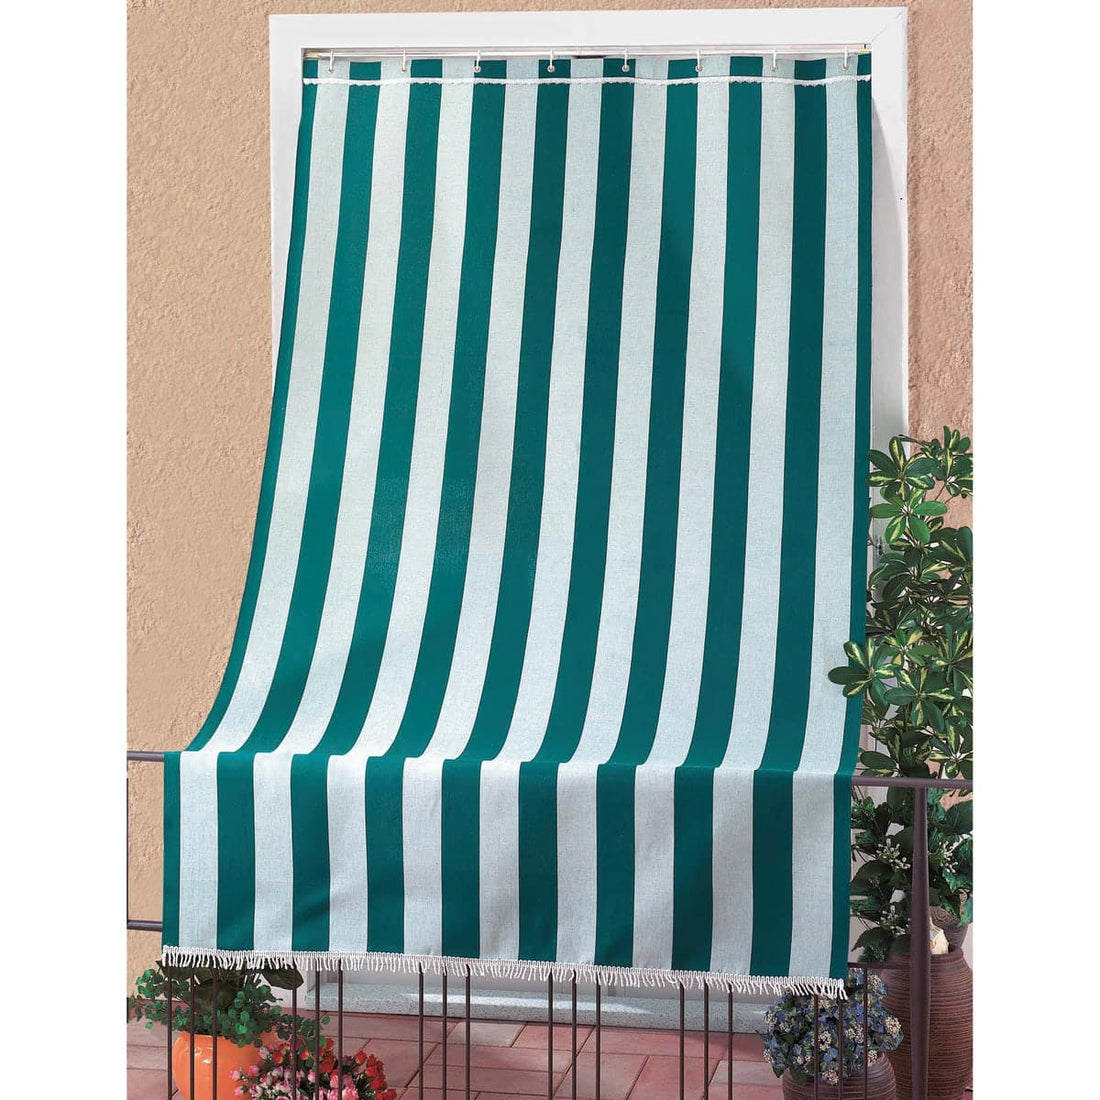 CARIBBEAN BALCONY AWNING 140X300 R/GREEN W/GLOOPS AND HOOKS - best price from Maltashopper.com BR480670171